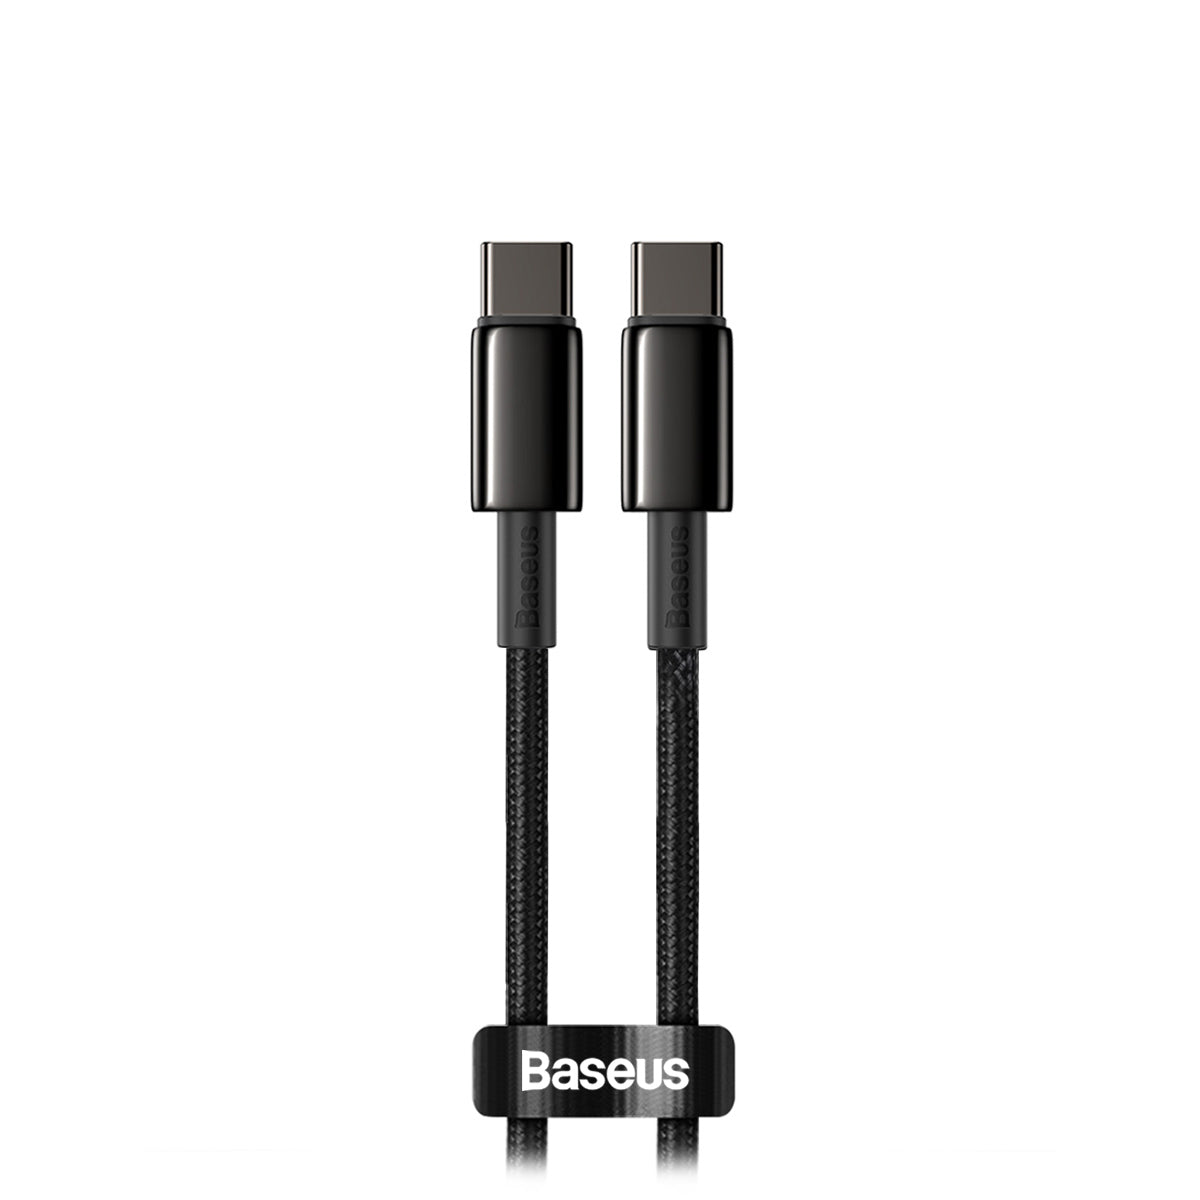 CABLE TIPO C A TIPO C 4.0 100W –